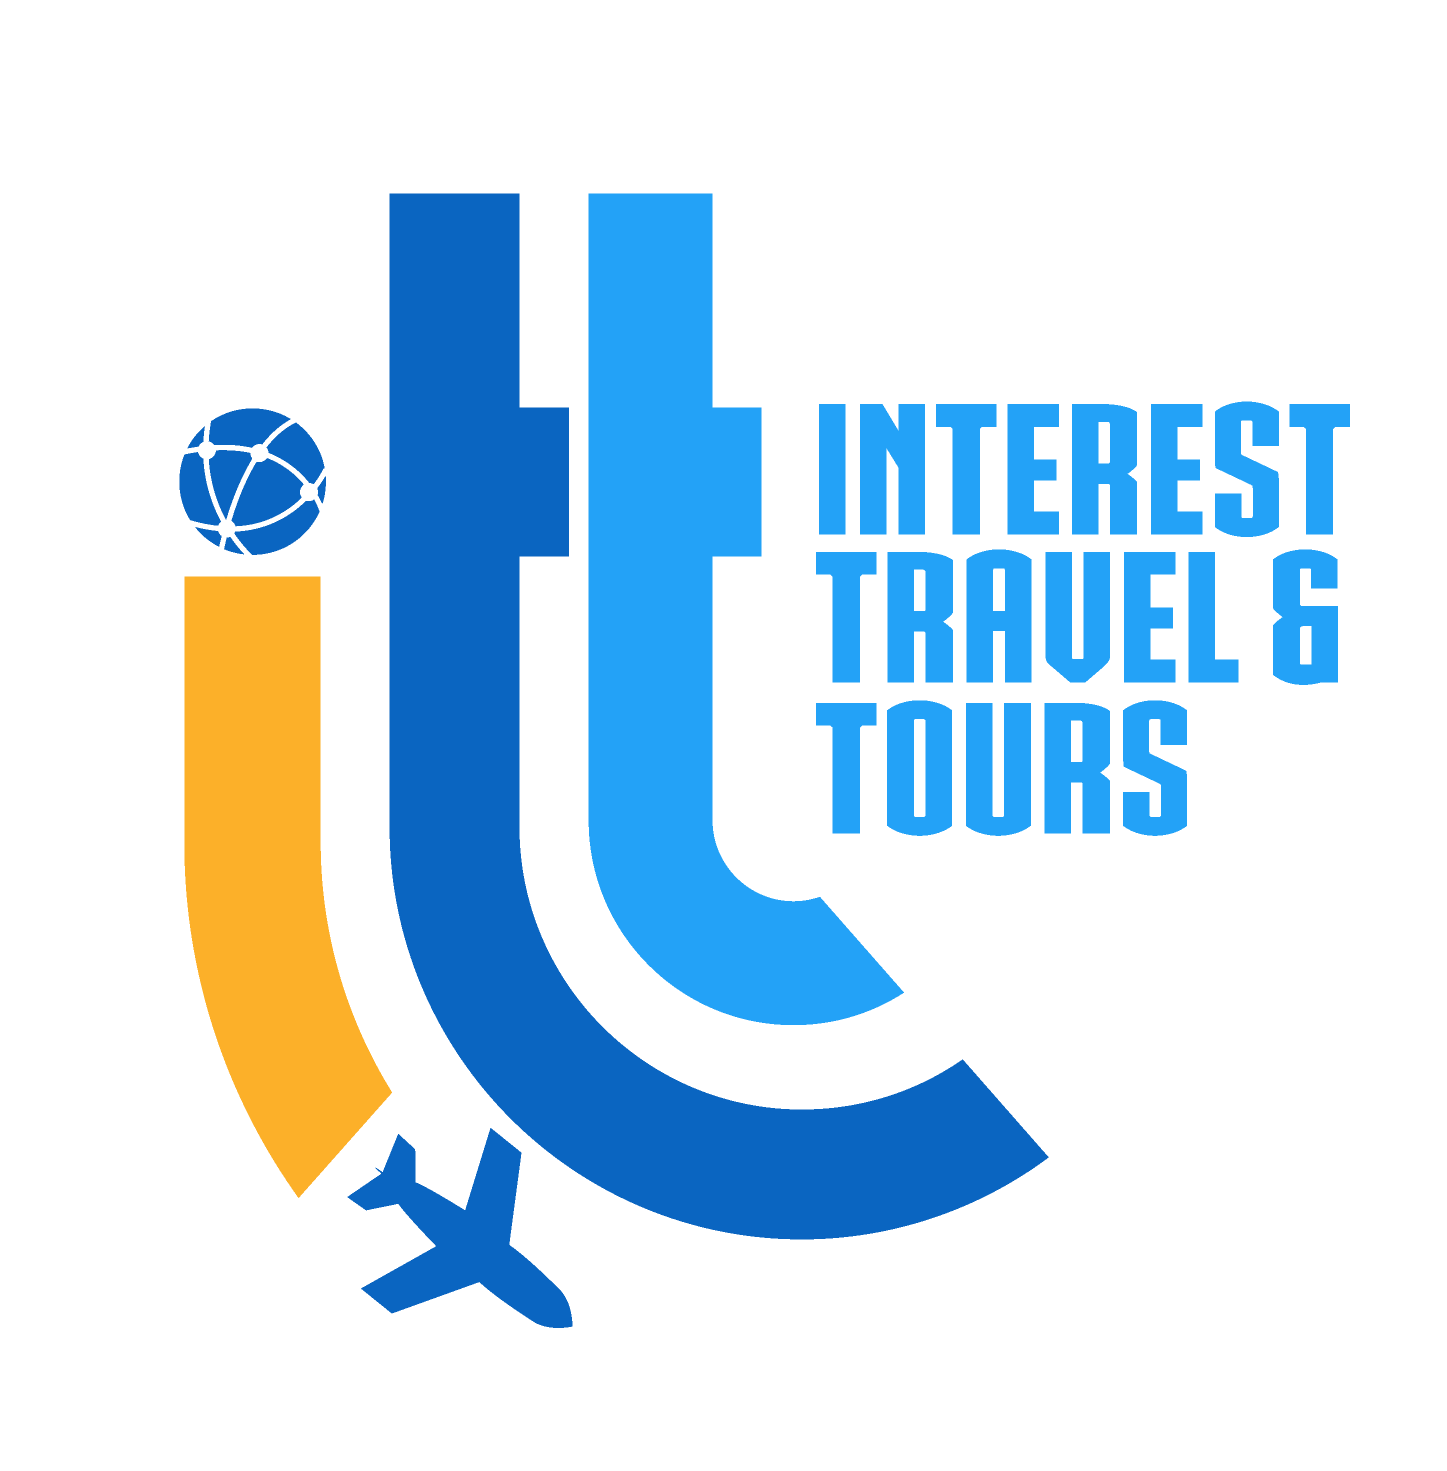 Interest Travel And Tours | AfroFuture 2023 - Interest Travel And Tours